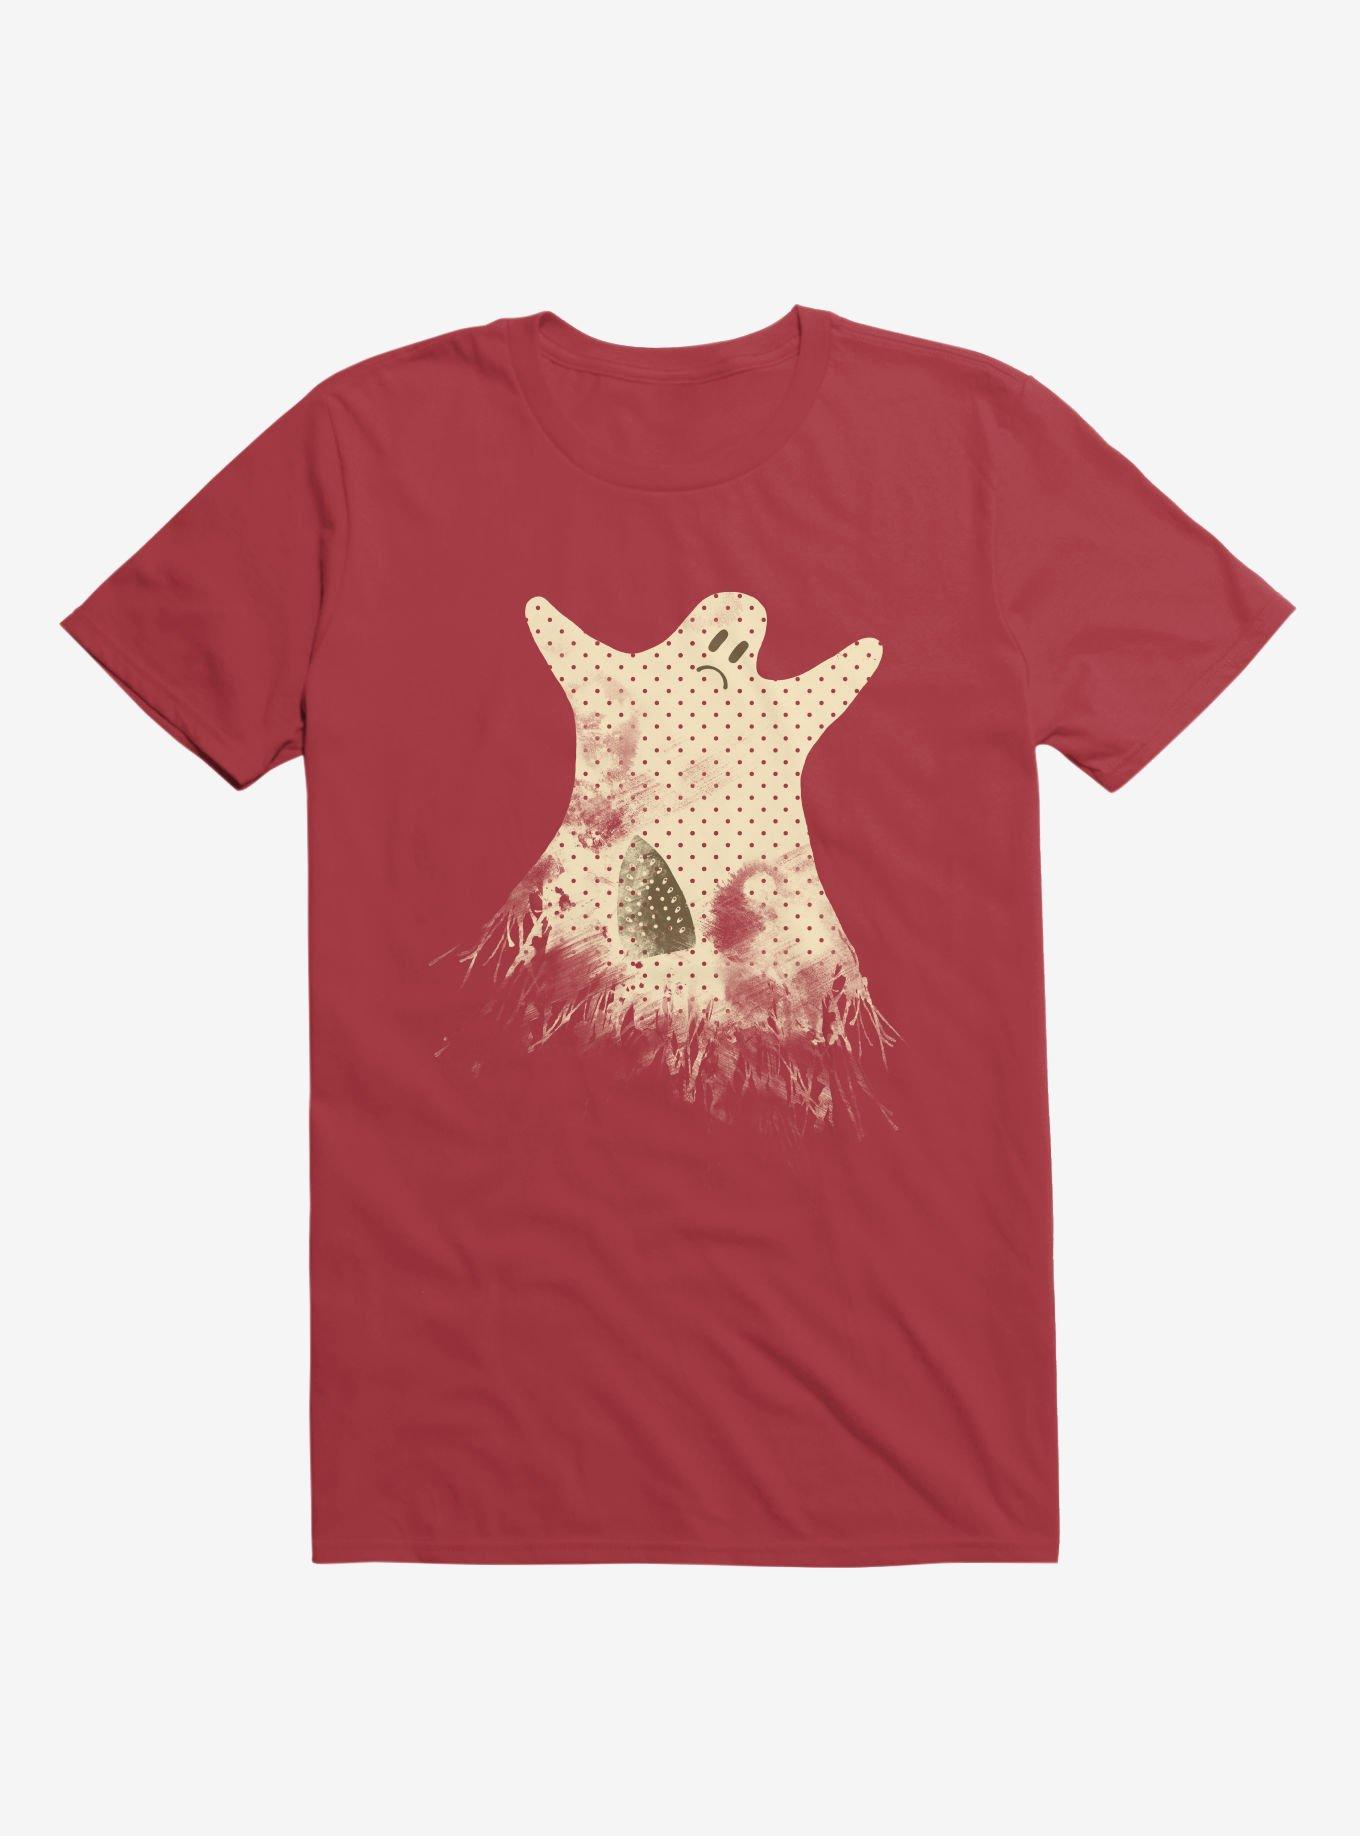 Used To Be Scarier Ghost T-Shirt, RED, hi-res